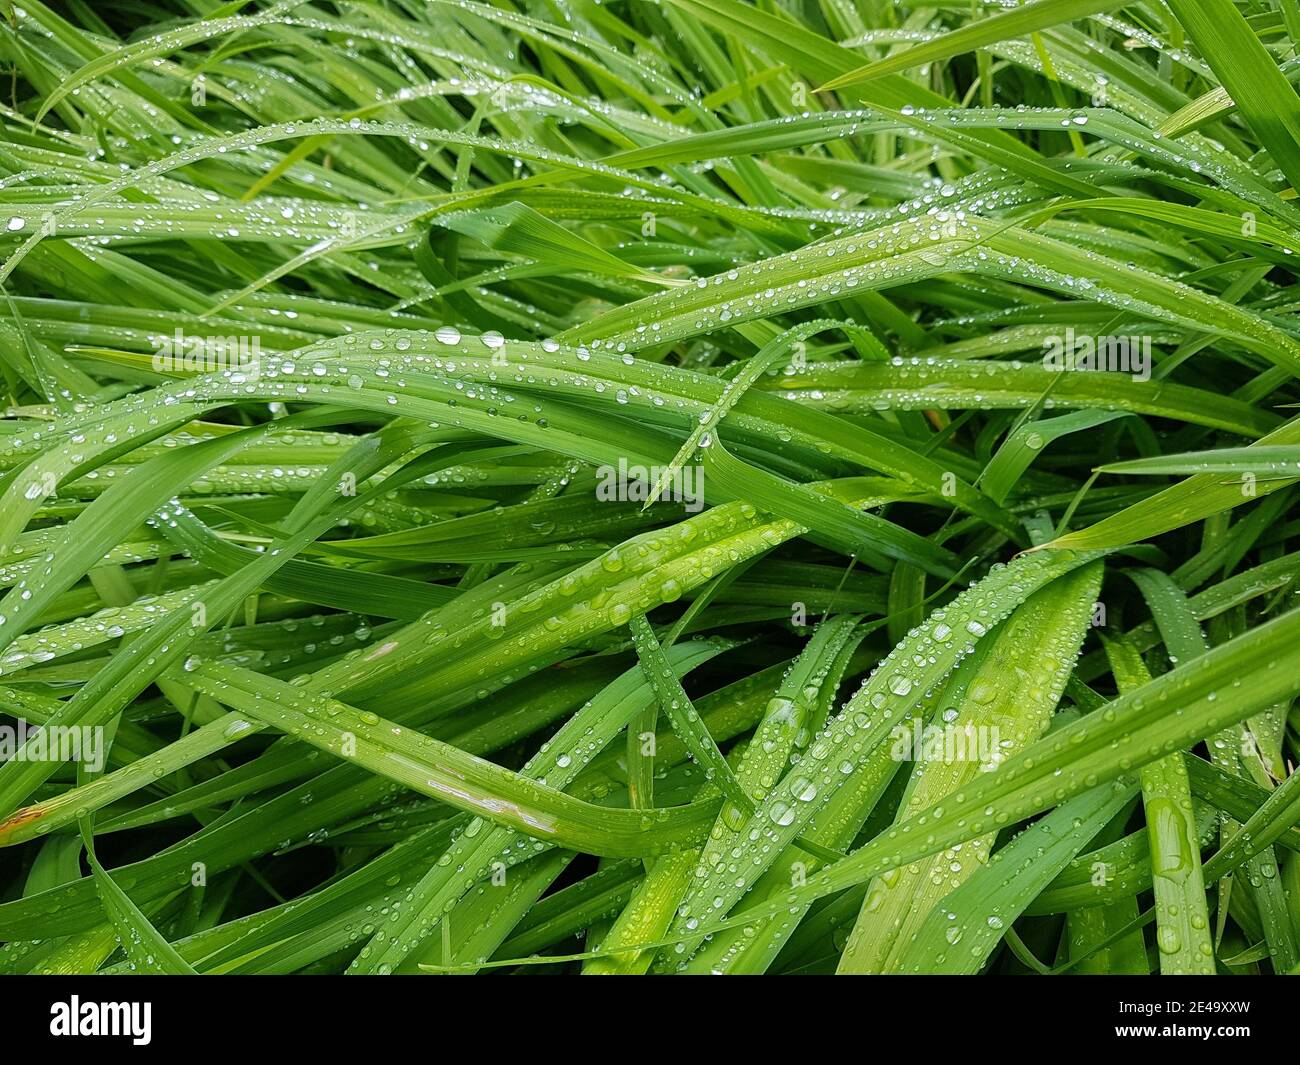 Green elongated leaves with water drops Stock Photo